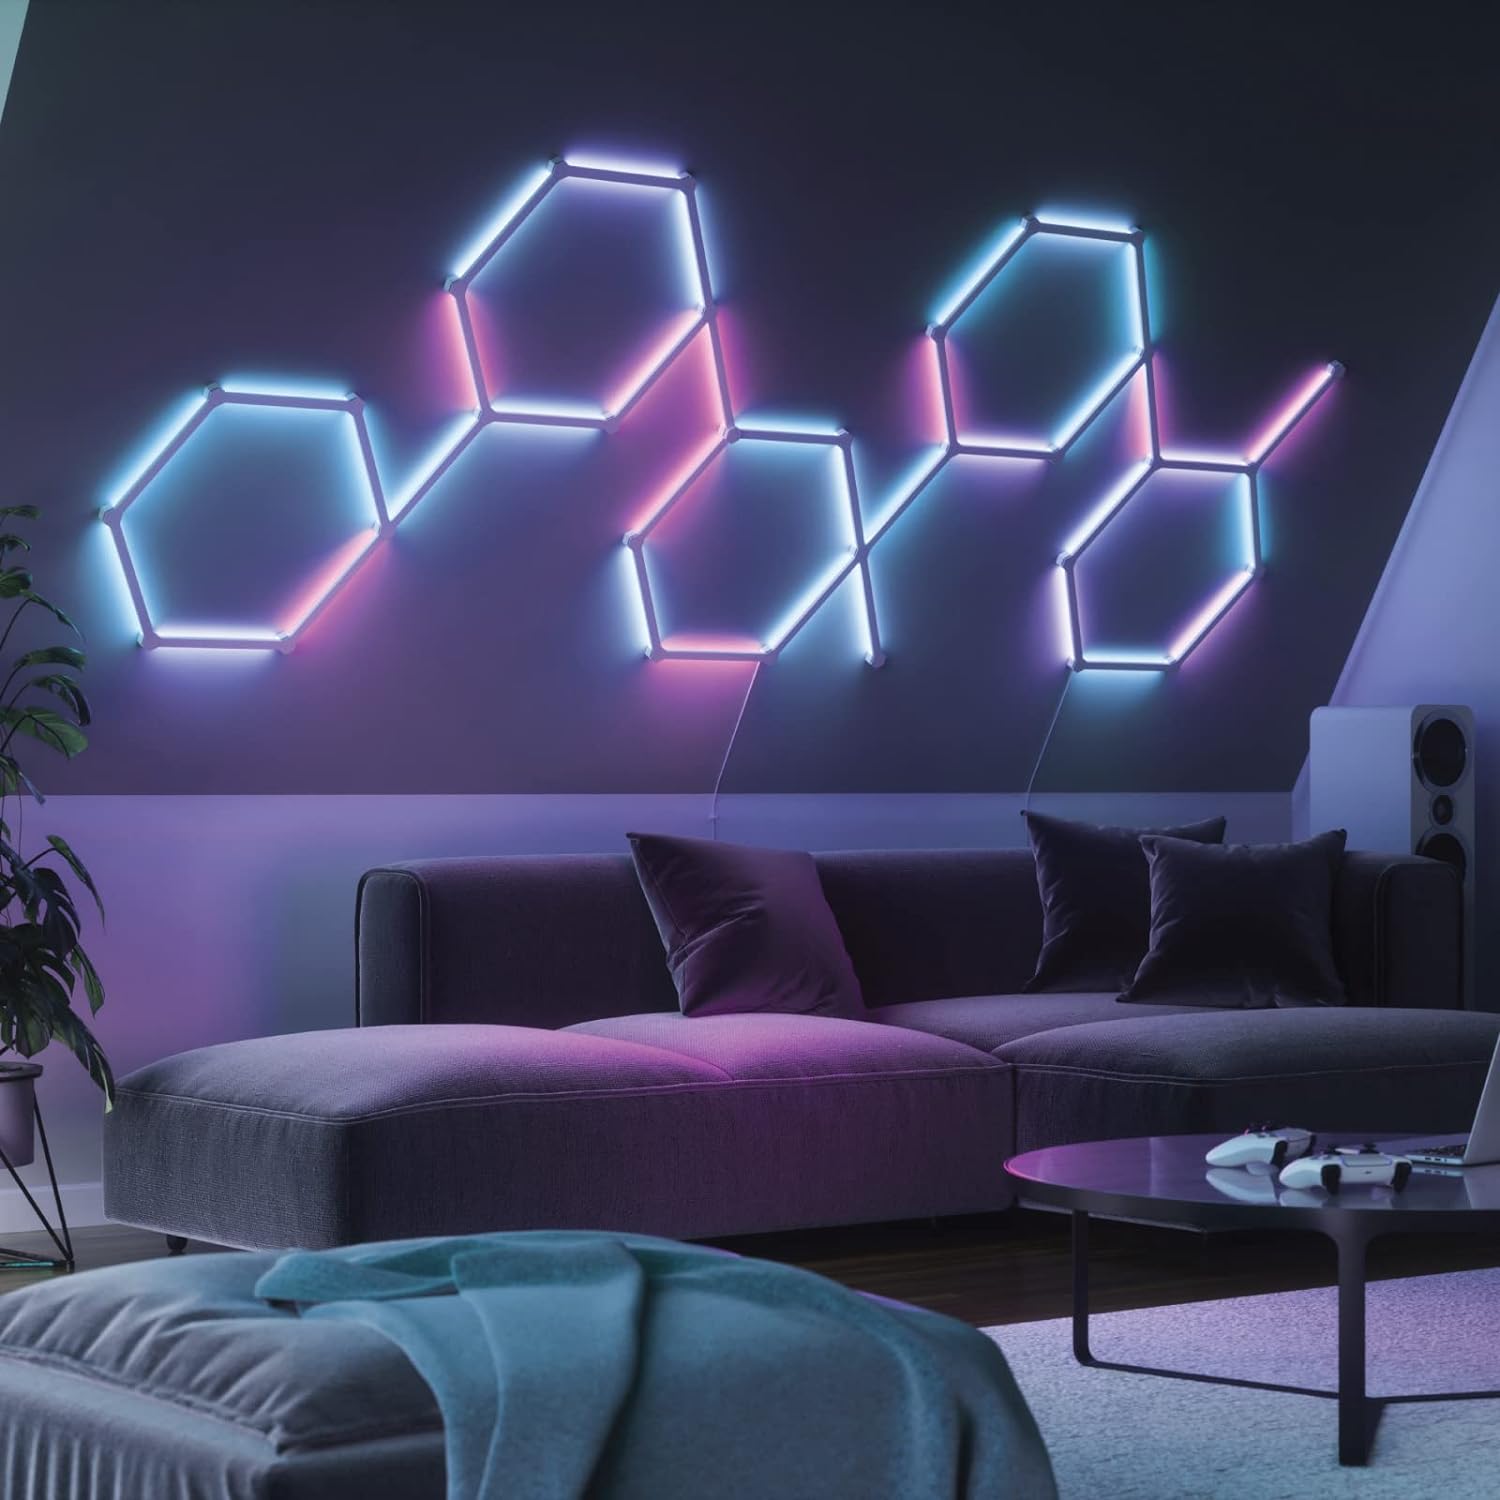 Nanoleaf Lines Starter Kit Modular Backlit Illumination, Smart Wifi Led System W/Music Visualizer, Instant Wall Decoration, Home Or Office Use, 16M+ Colors, Low Energy Consumption 15 Pack, White